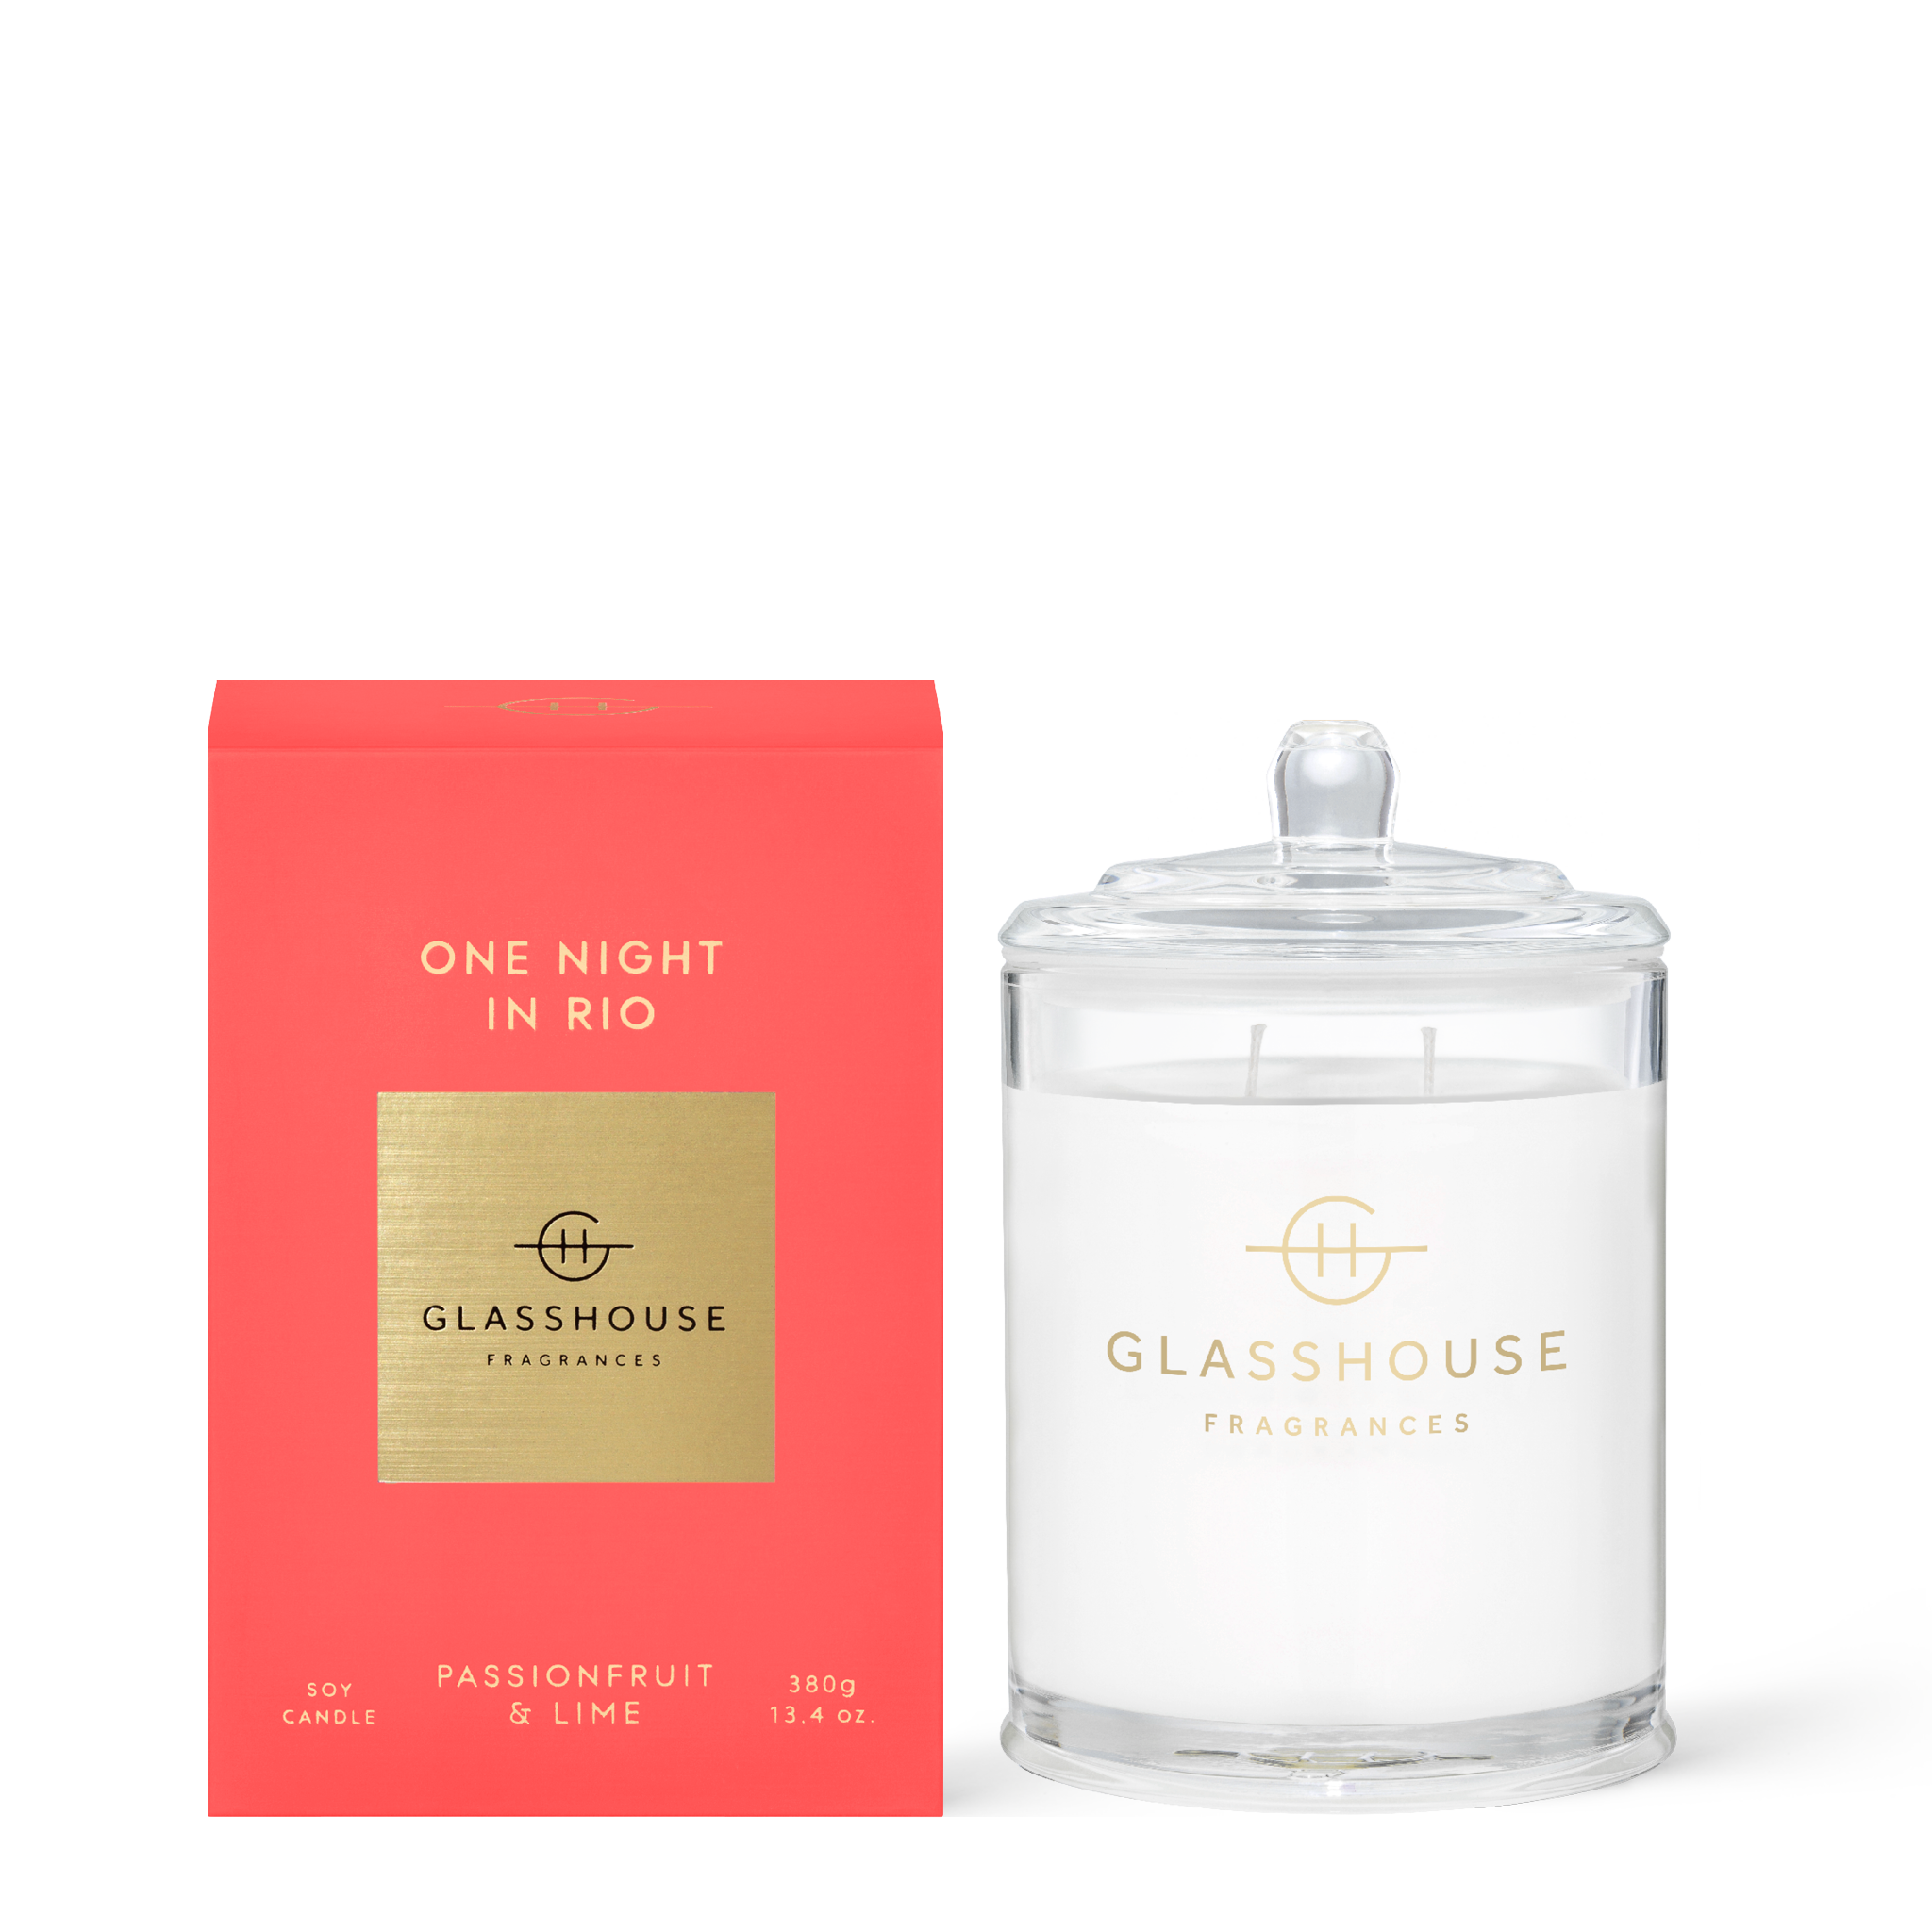 Glasshouse Fragrances One Night in Rio Passionfruit and Lime 380g Soy Candle with box